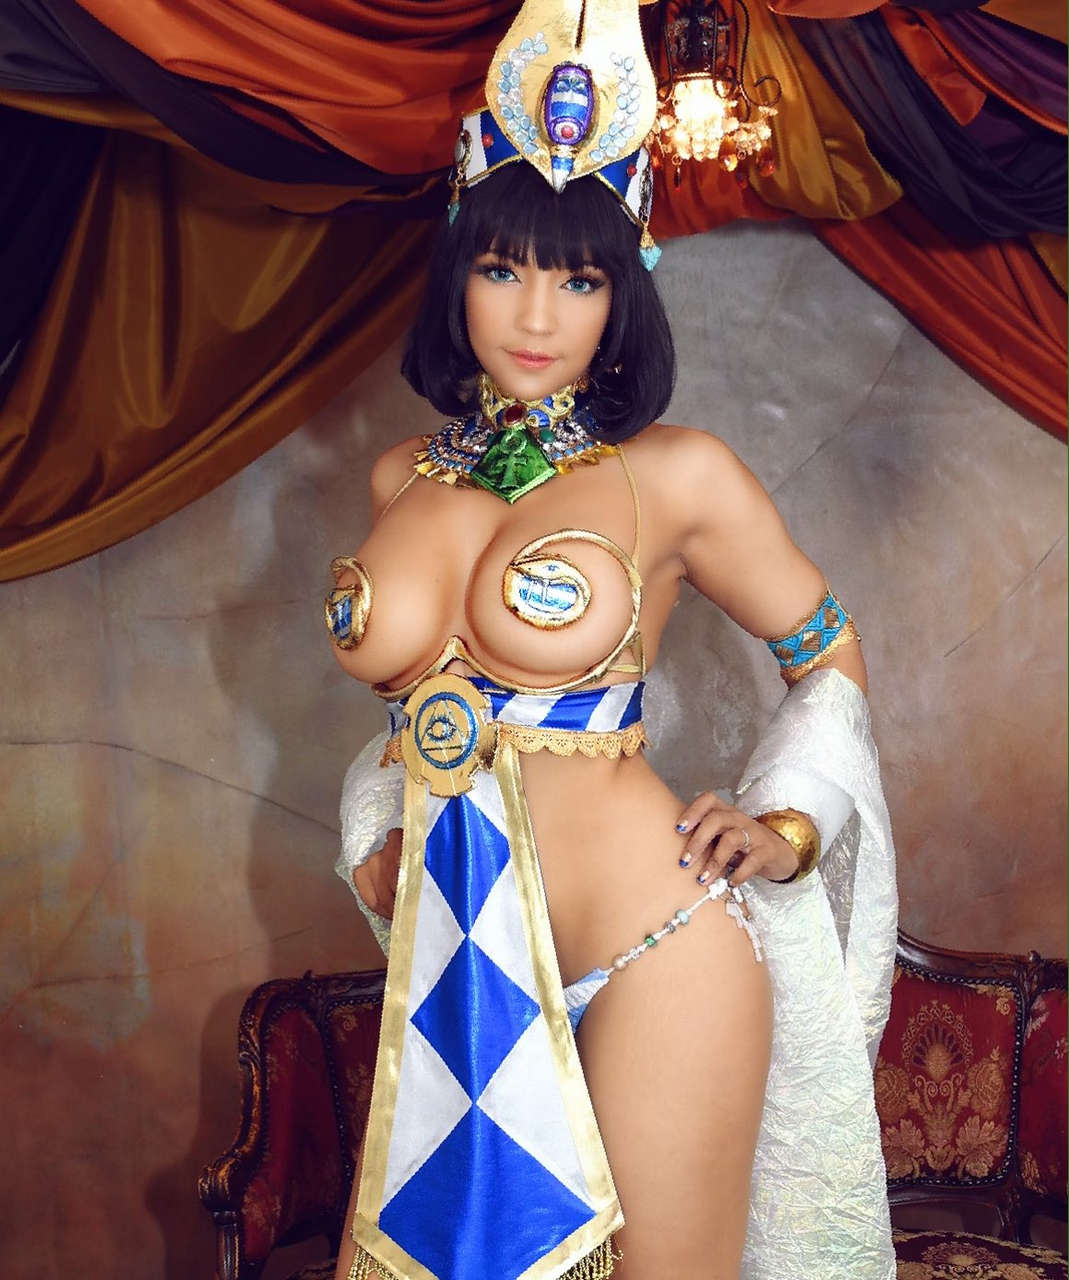 Menace From Queens Blade By Pattiecospla